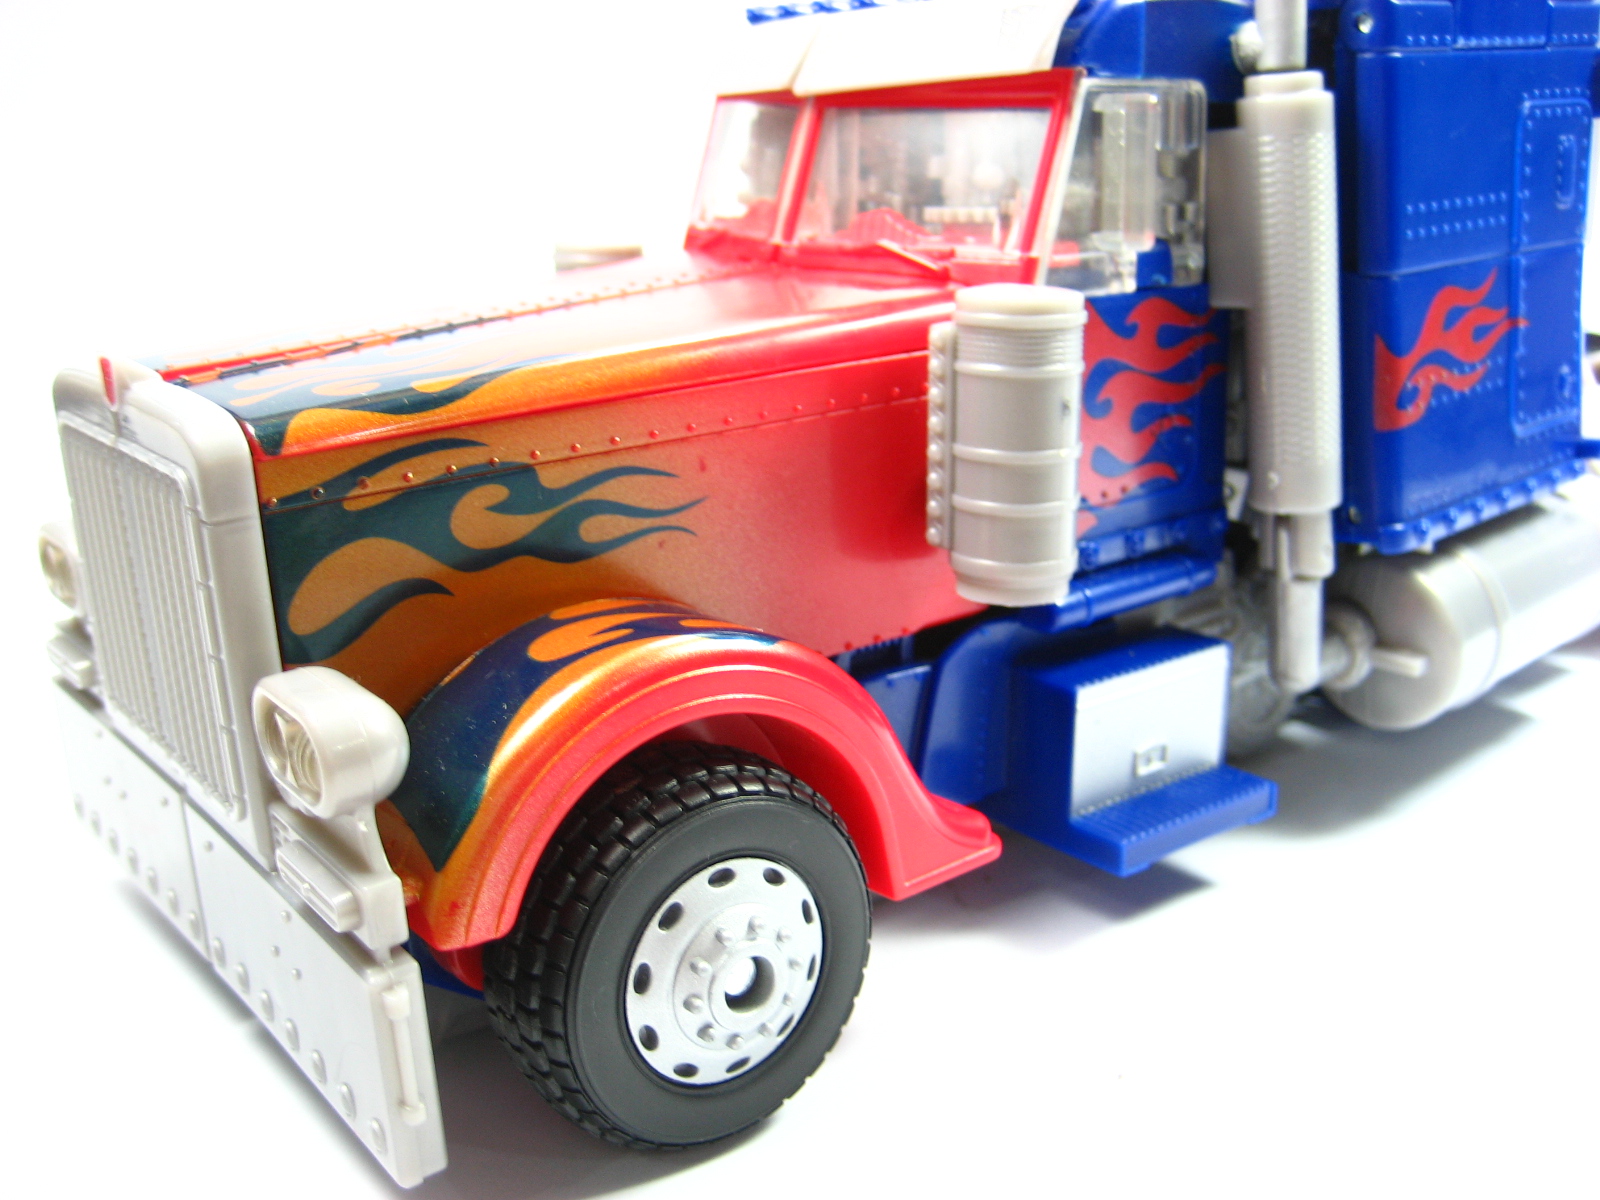 a toy truck is displayed on a white background